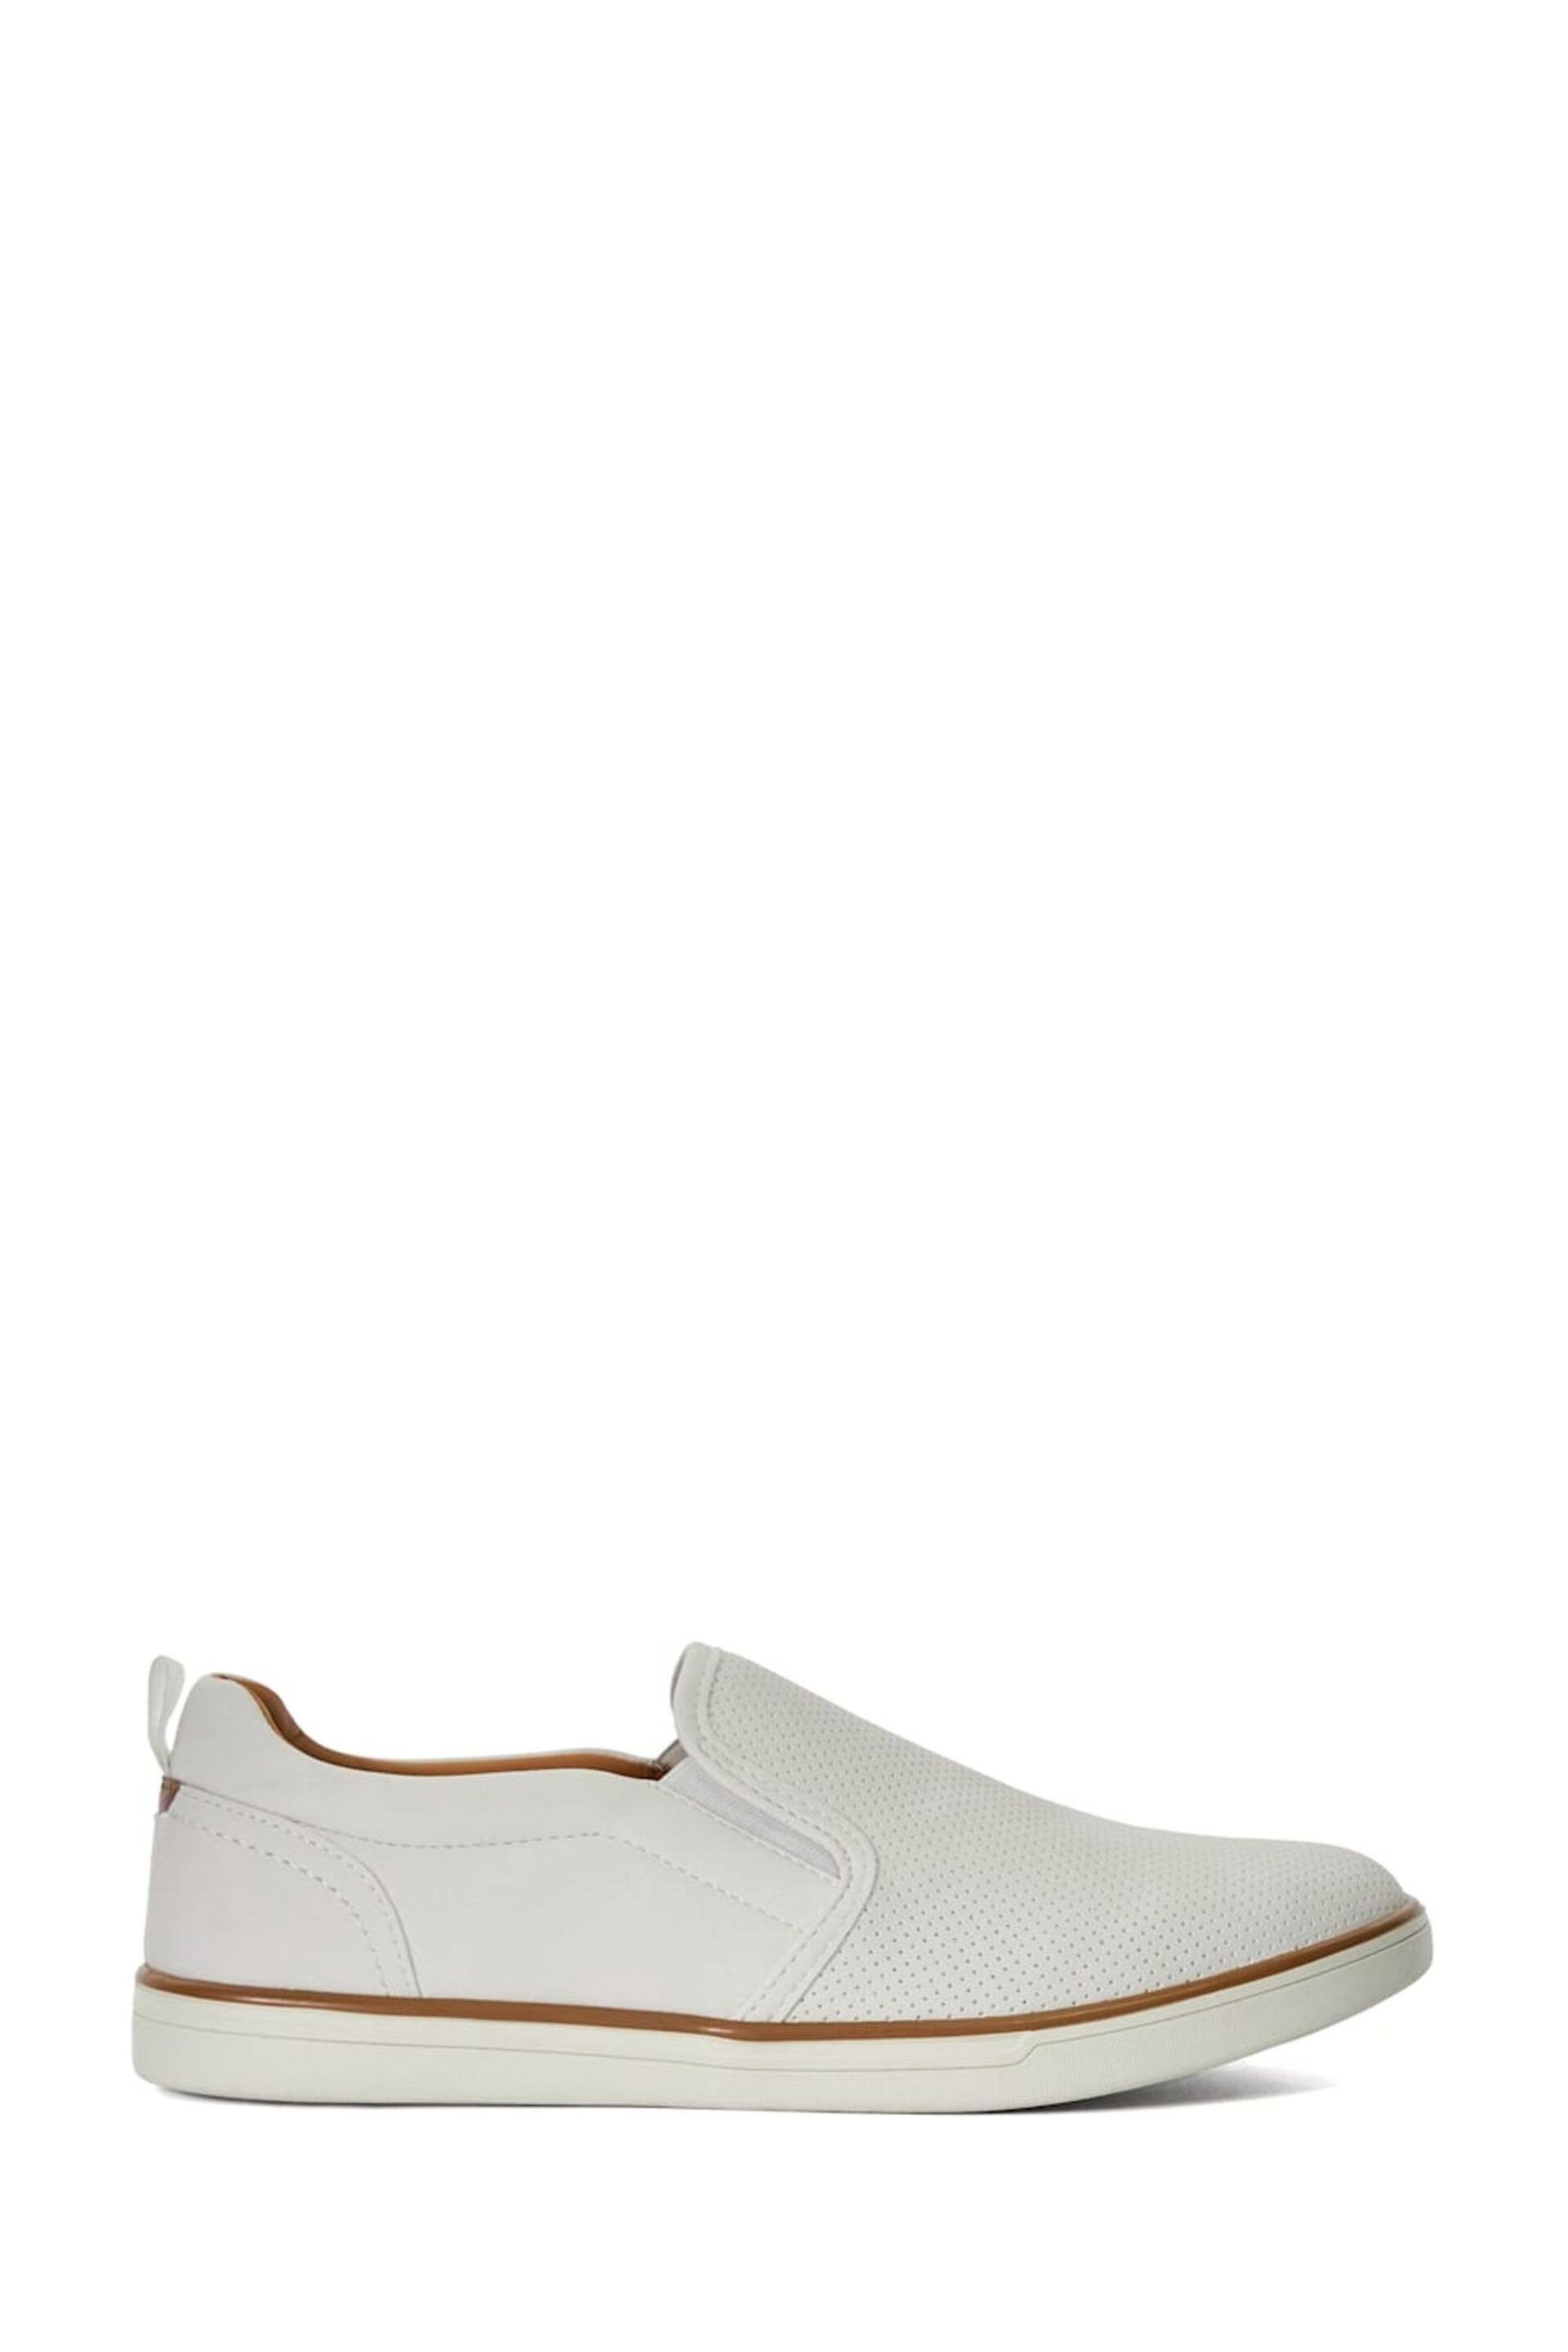 Dune London White Totals Perforated Slip-On Trainers - Image 3 of 6